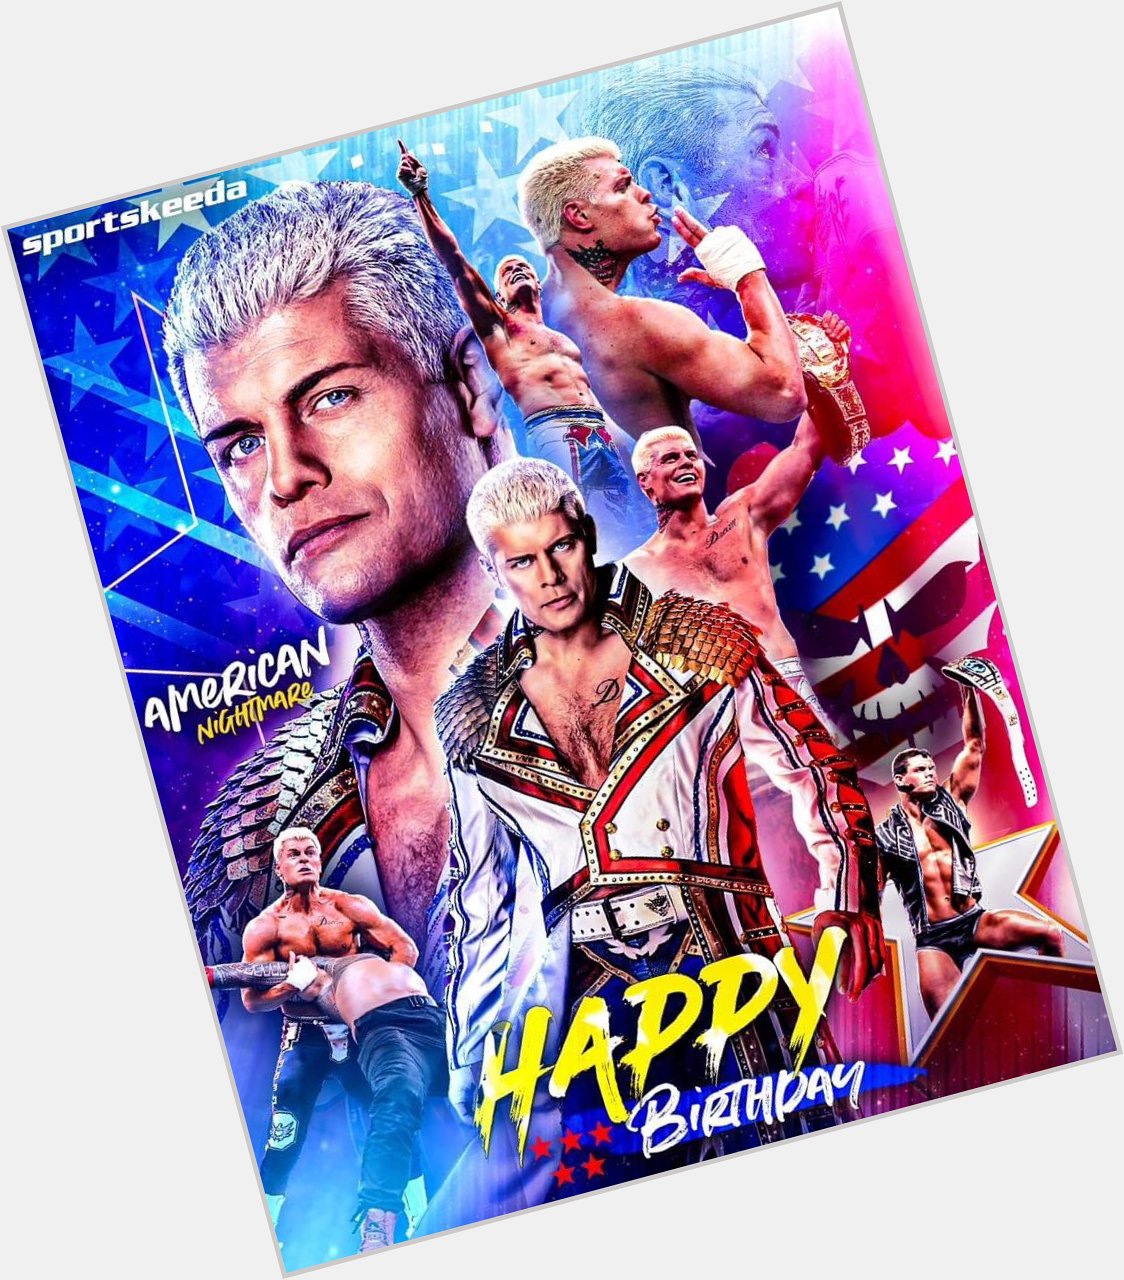 Happy 38th birthday to the American nightmare cody rhodes I hope you have a great day   